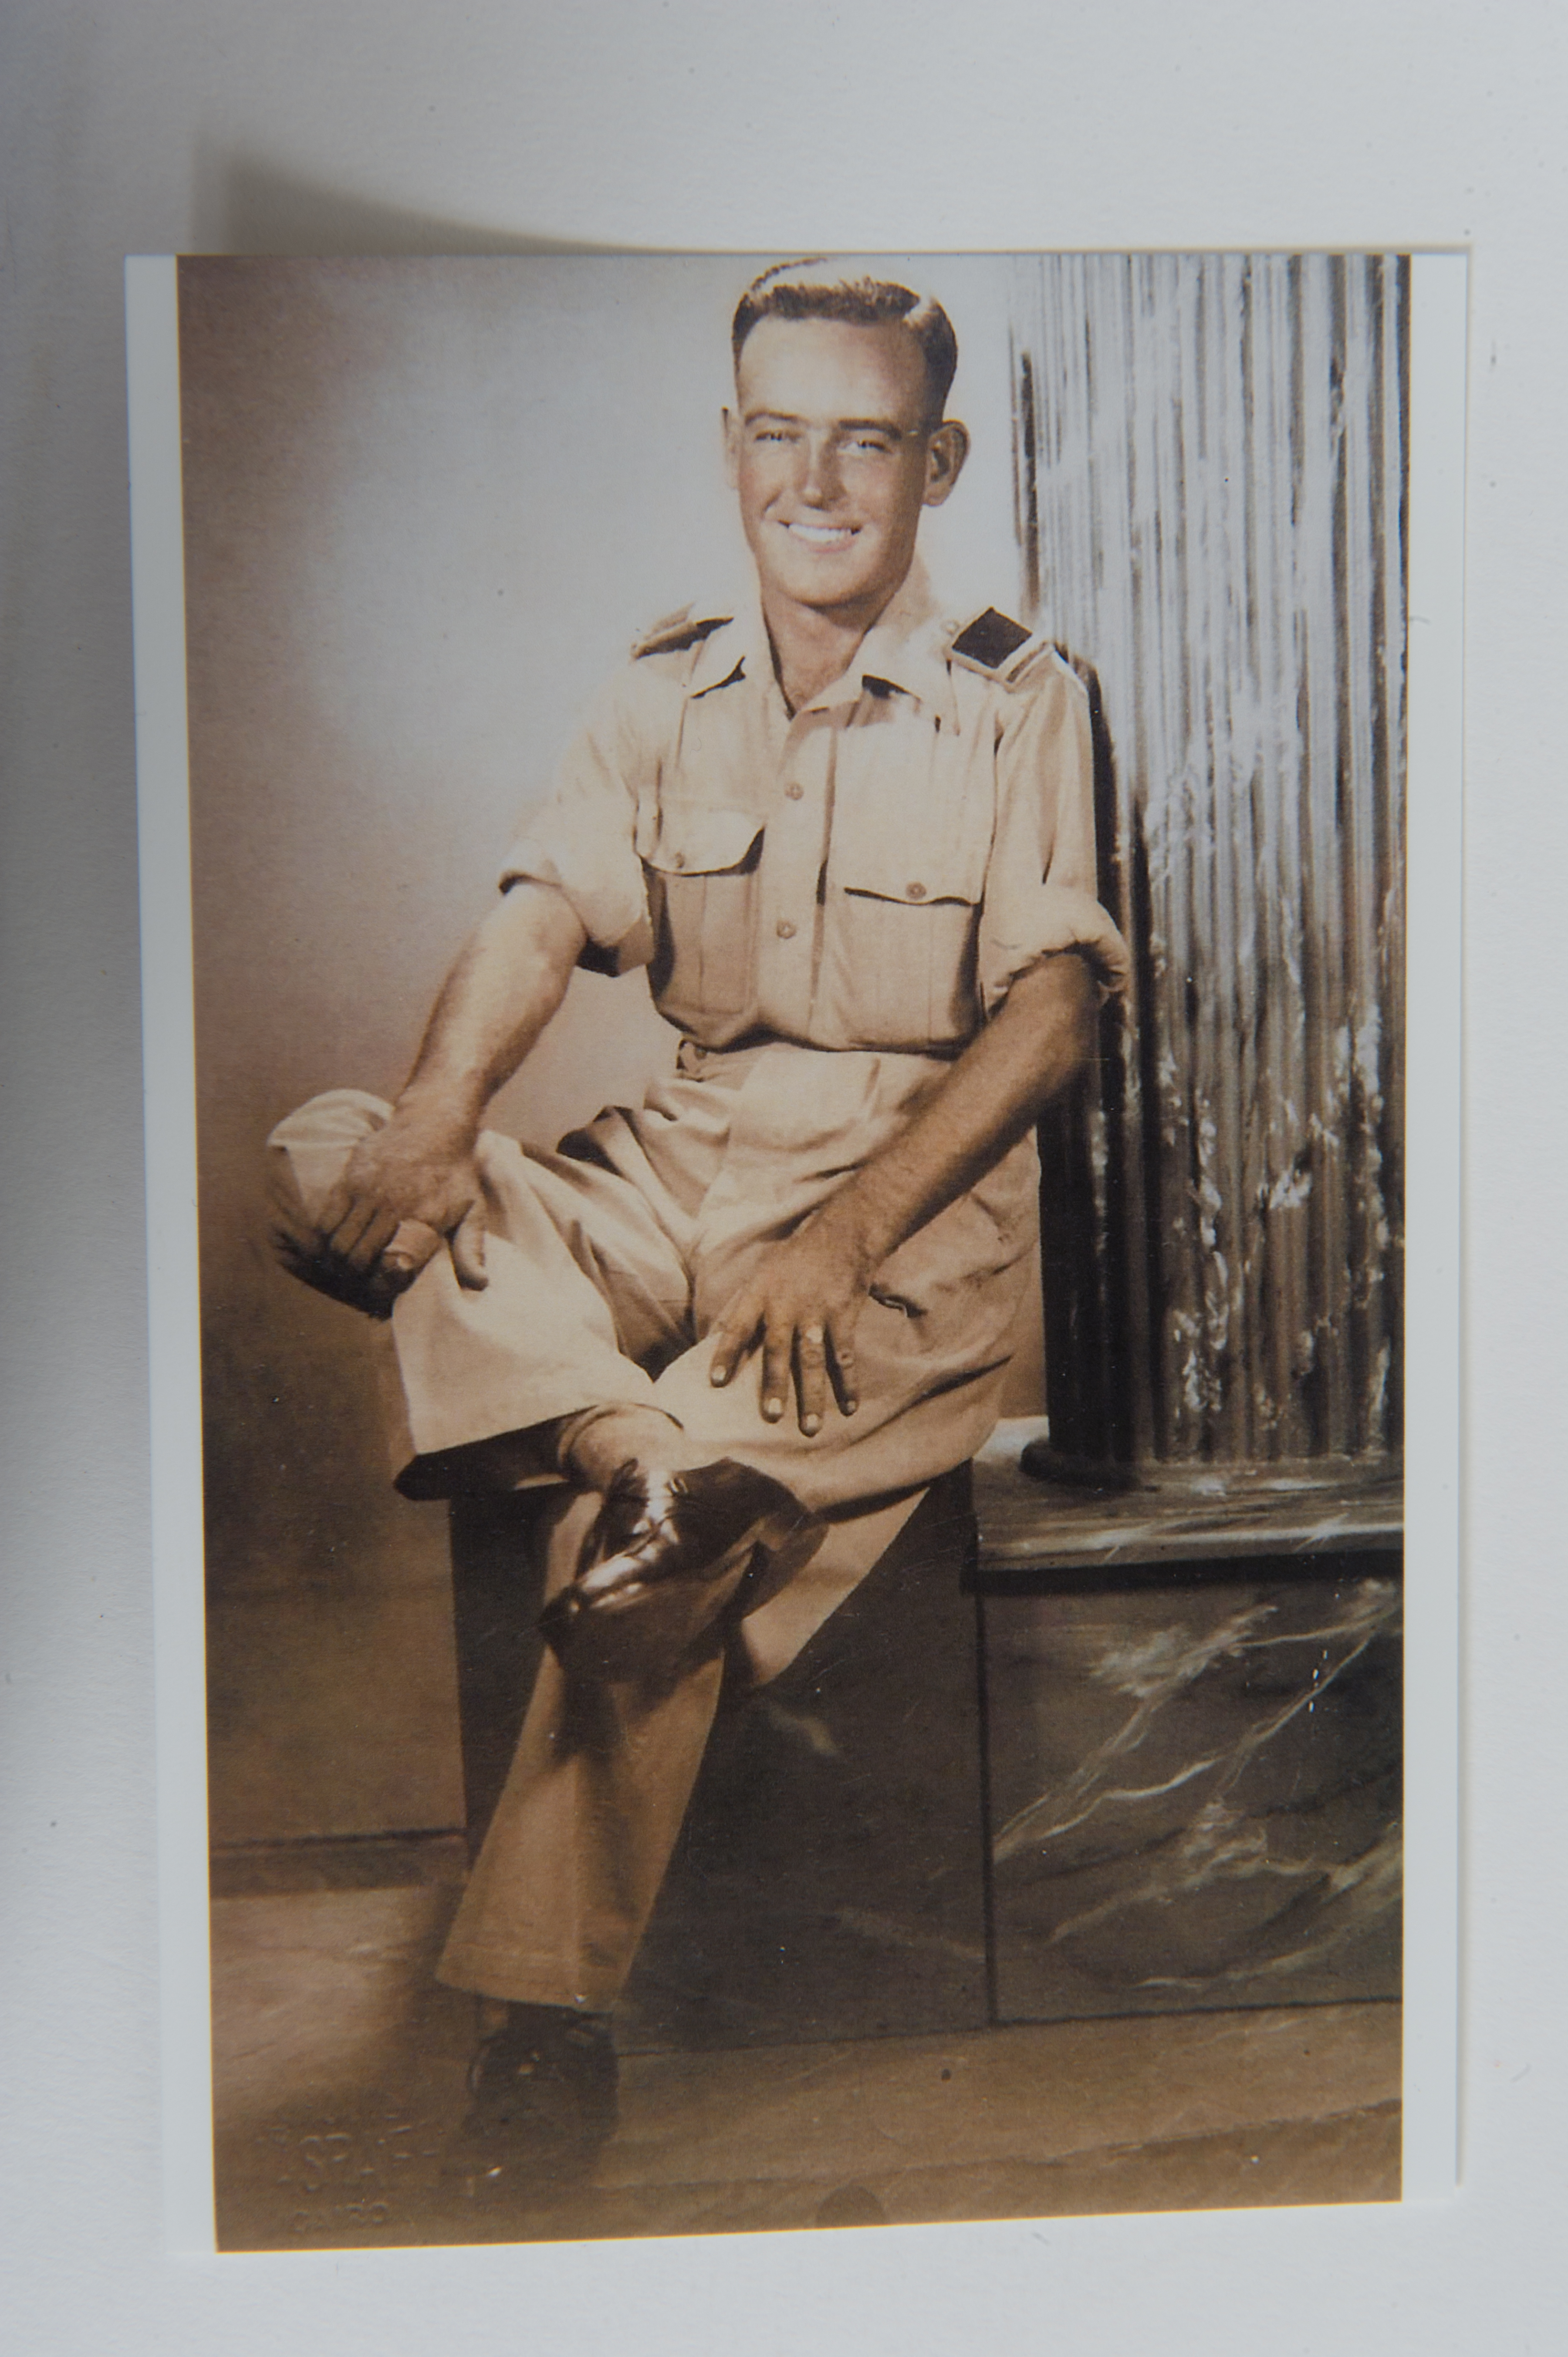 A sepia toned photo shows a man in military uniform, sitting causally with right leg crossed over left knee, shirt sleeves rolled up, and both hands on knees.